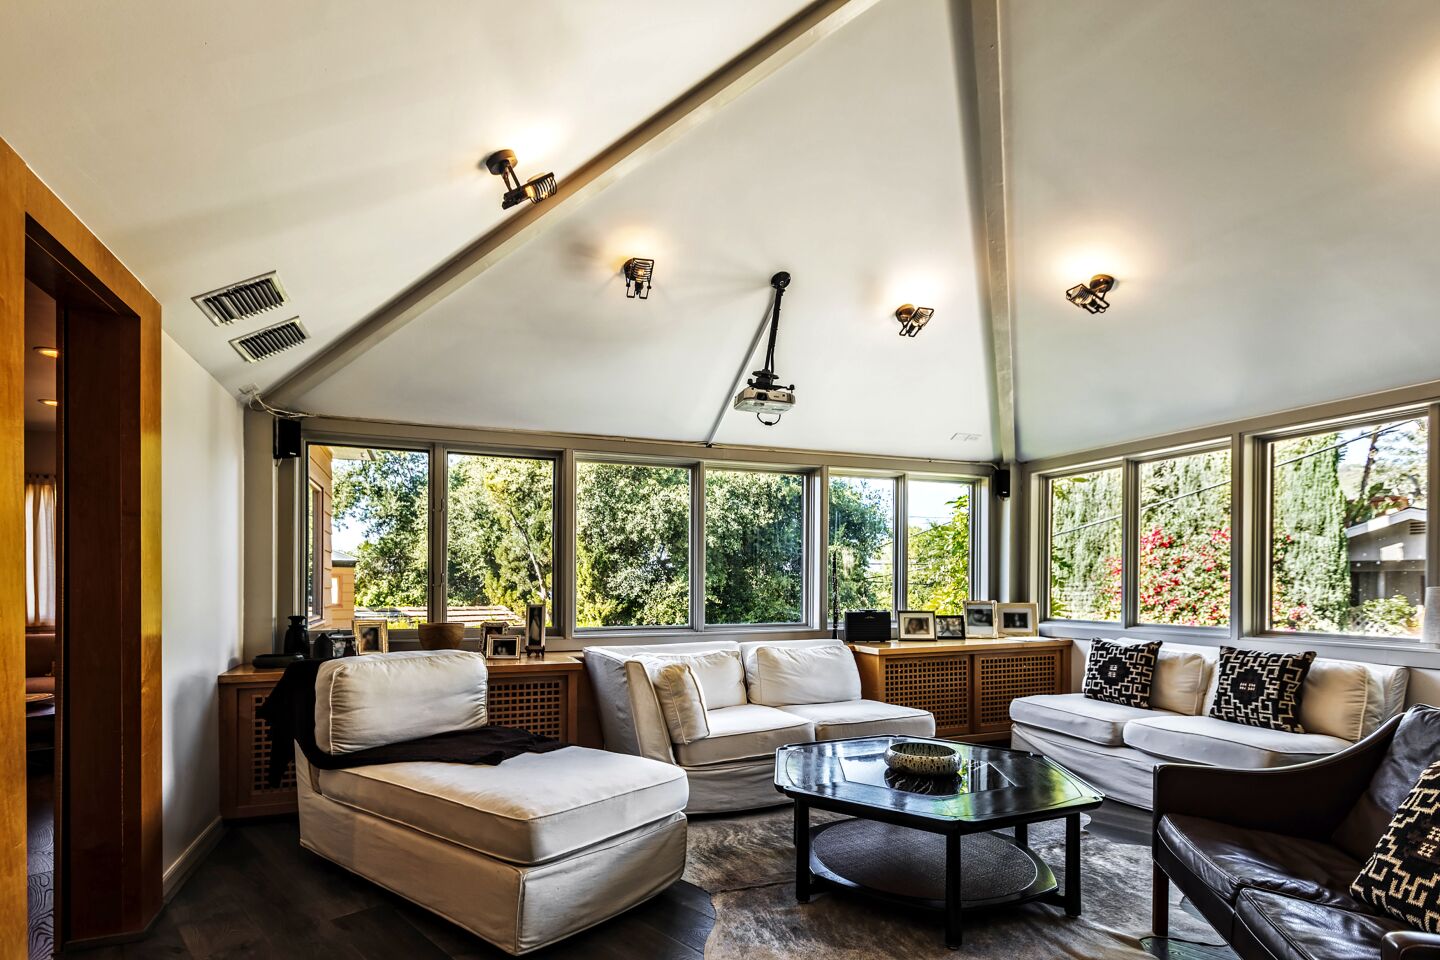 Malibu architect Barry Gittelson turned an upper deck of the house into a media room.